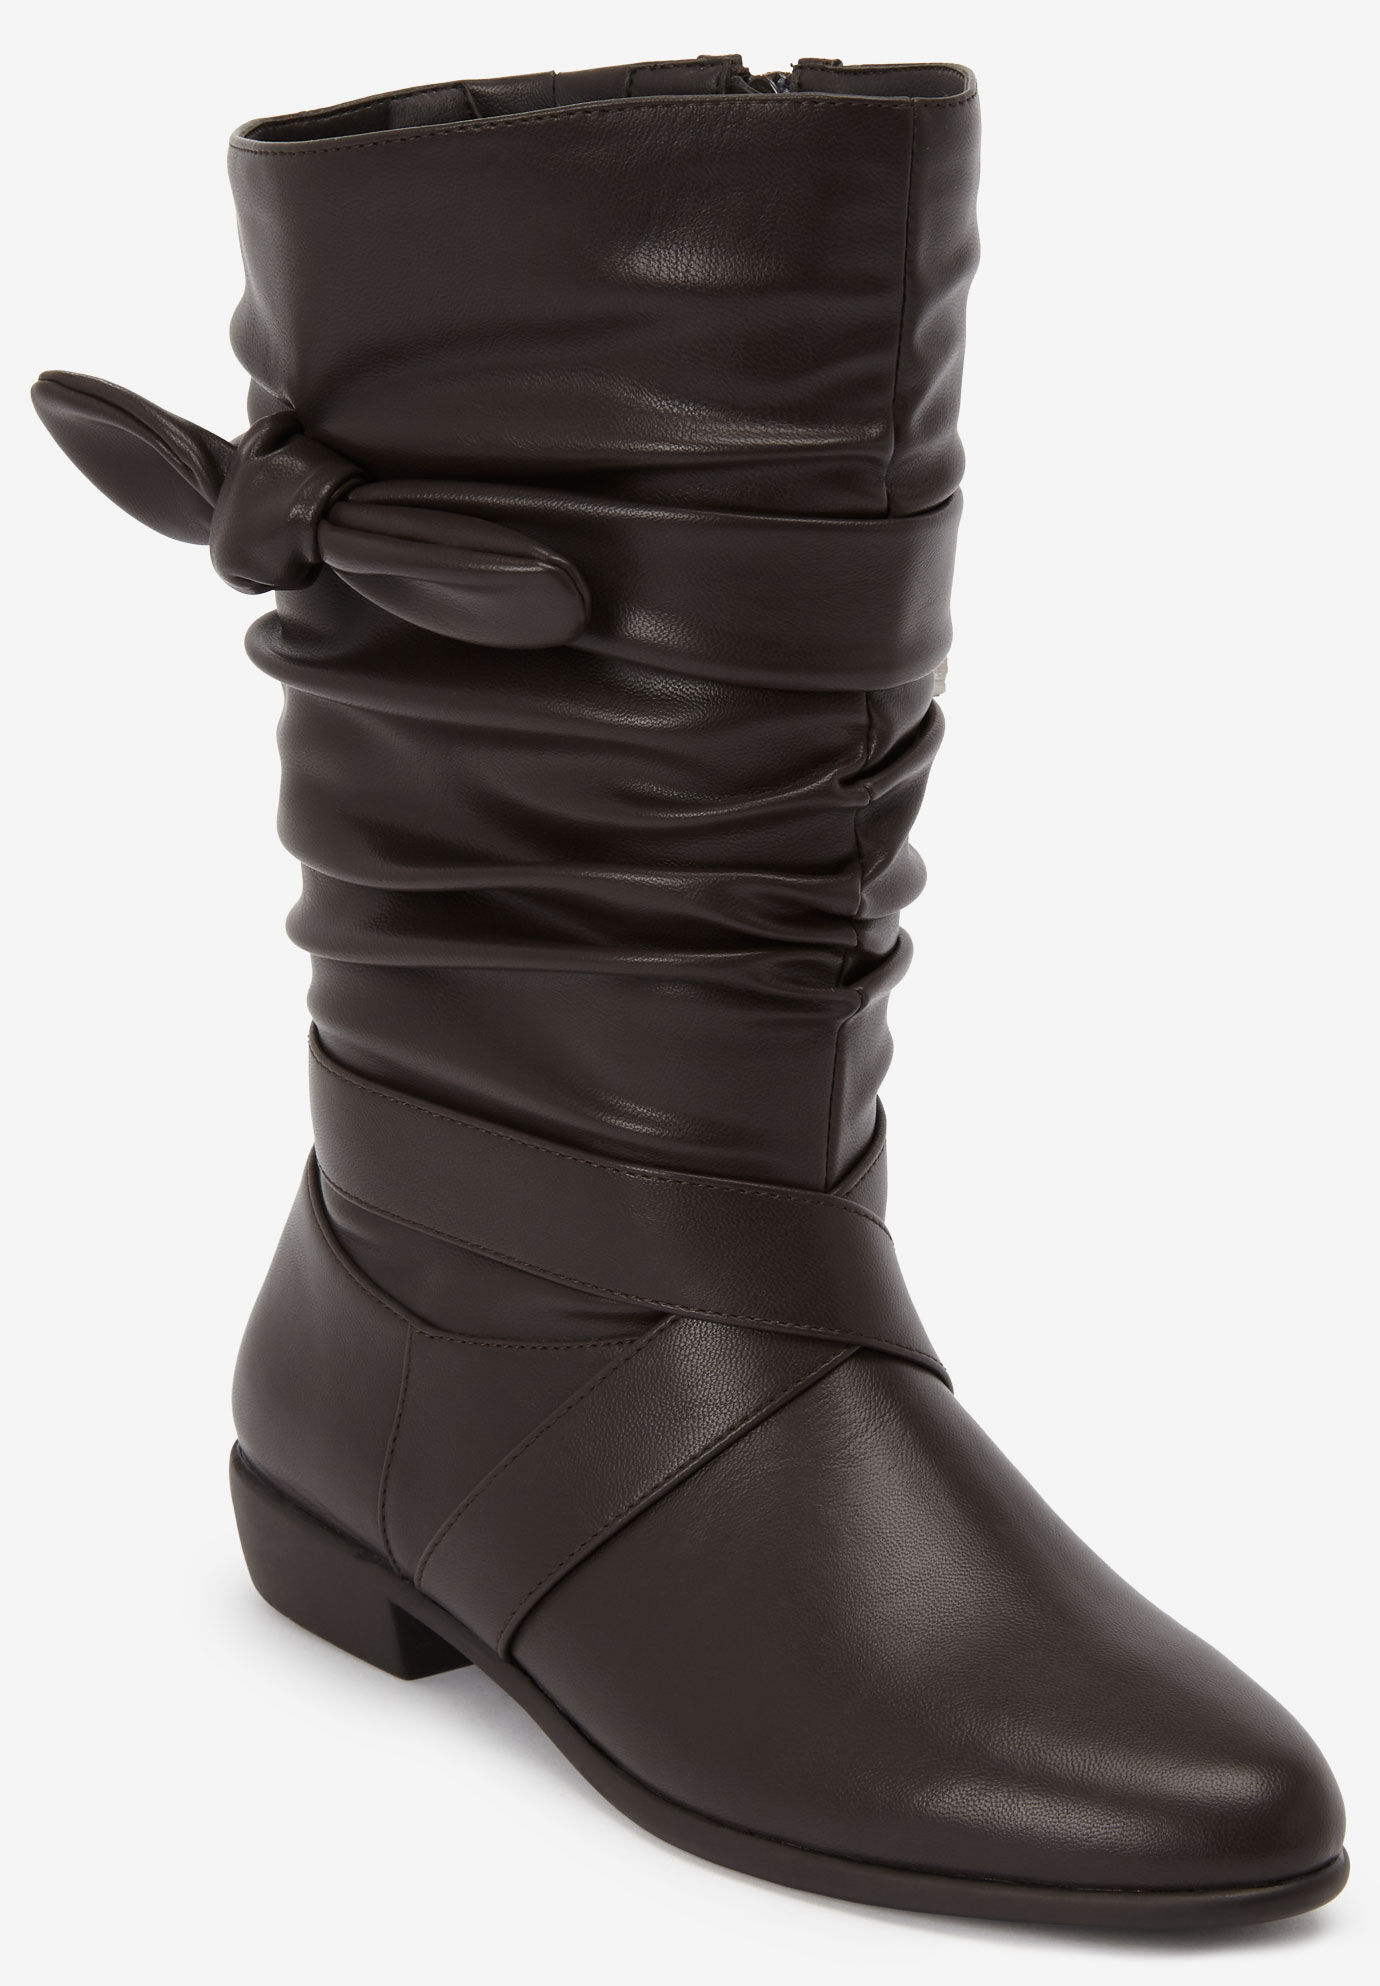 wide calf boots in stores